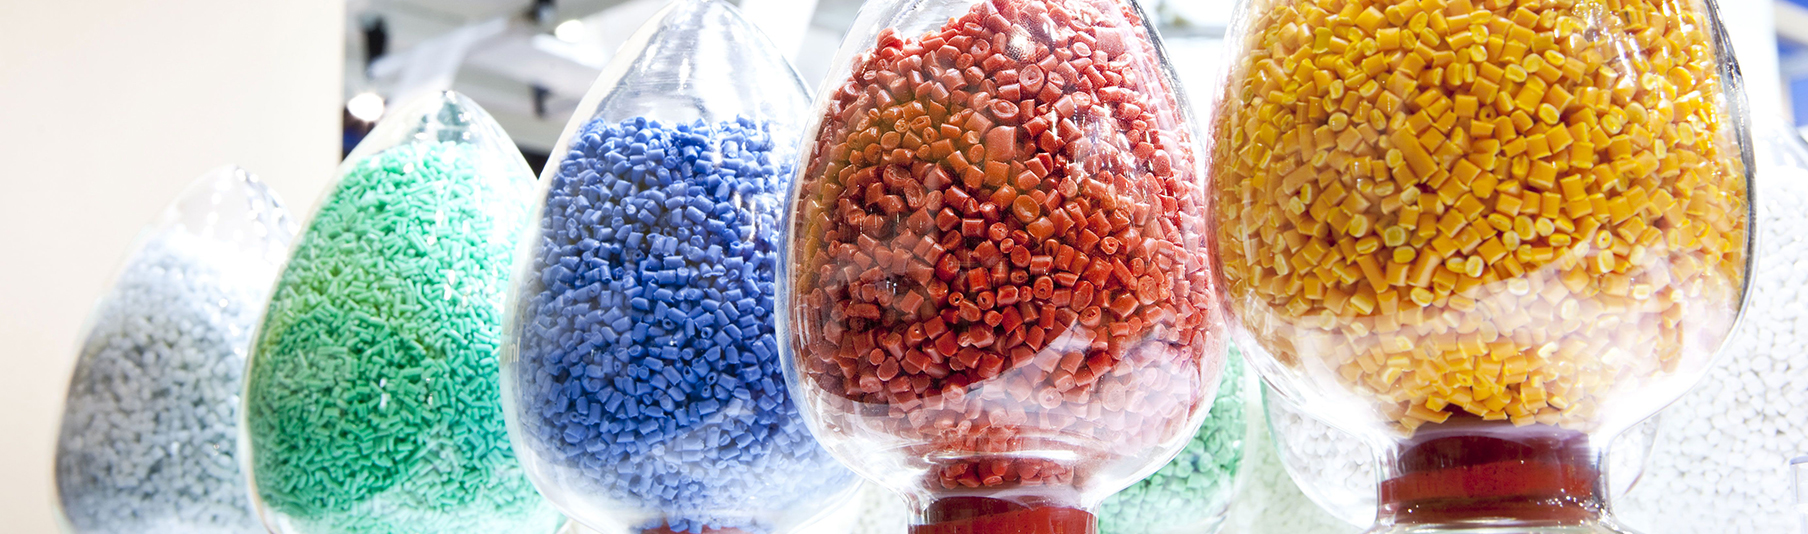 Manufacturing Insurance: A row of colourful manufactured pieces sitting in glass containers